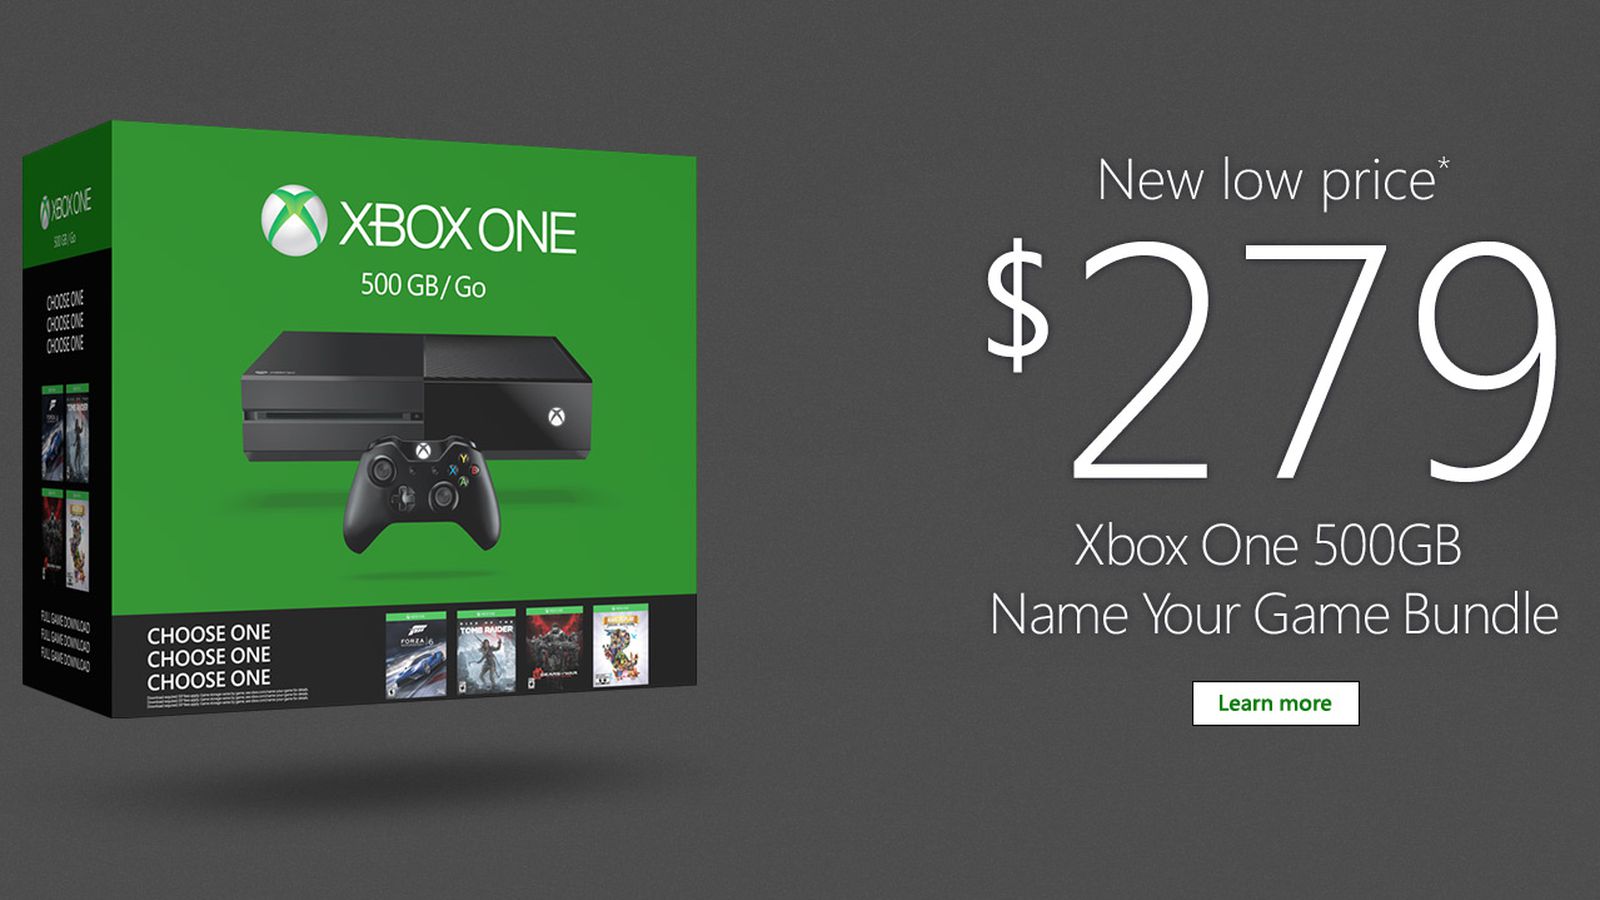 Xbox One price drops again to 279 The Verge